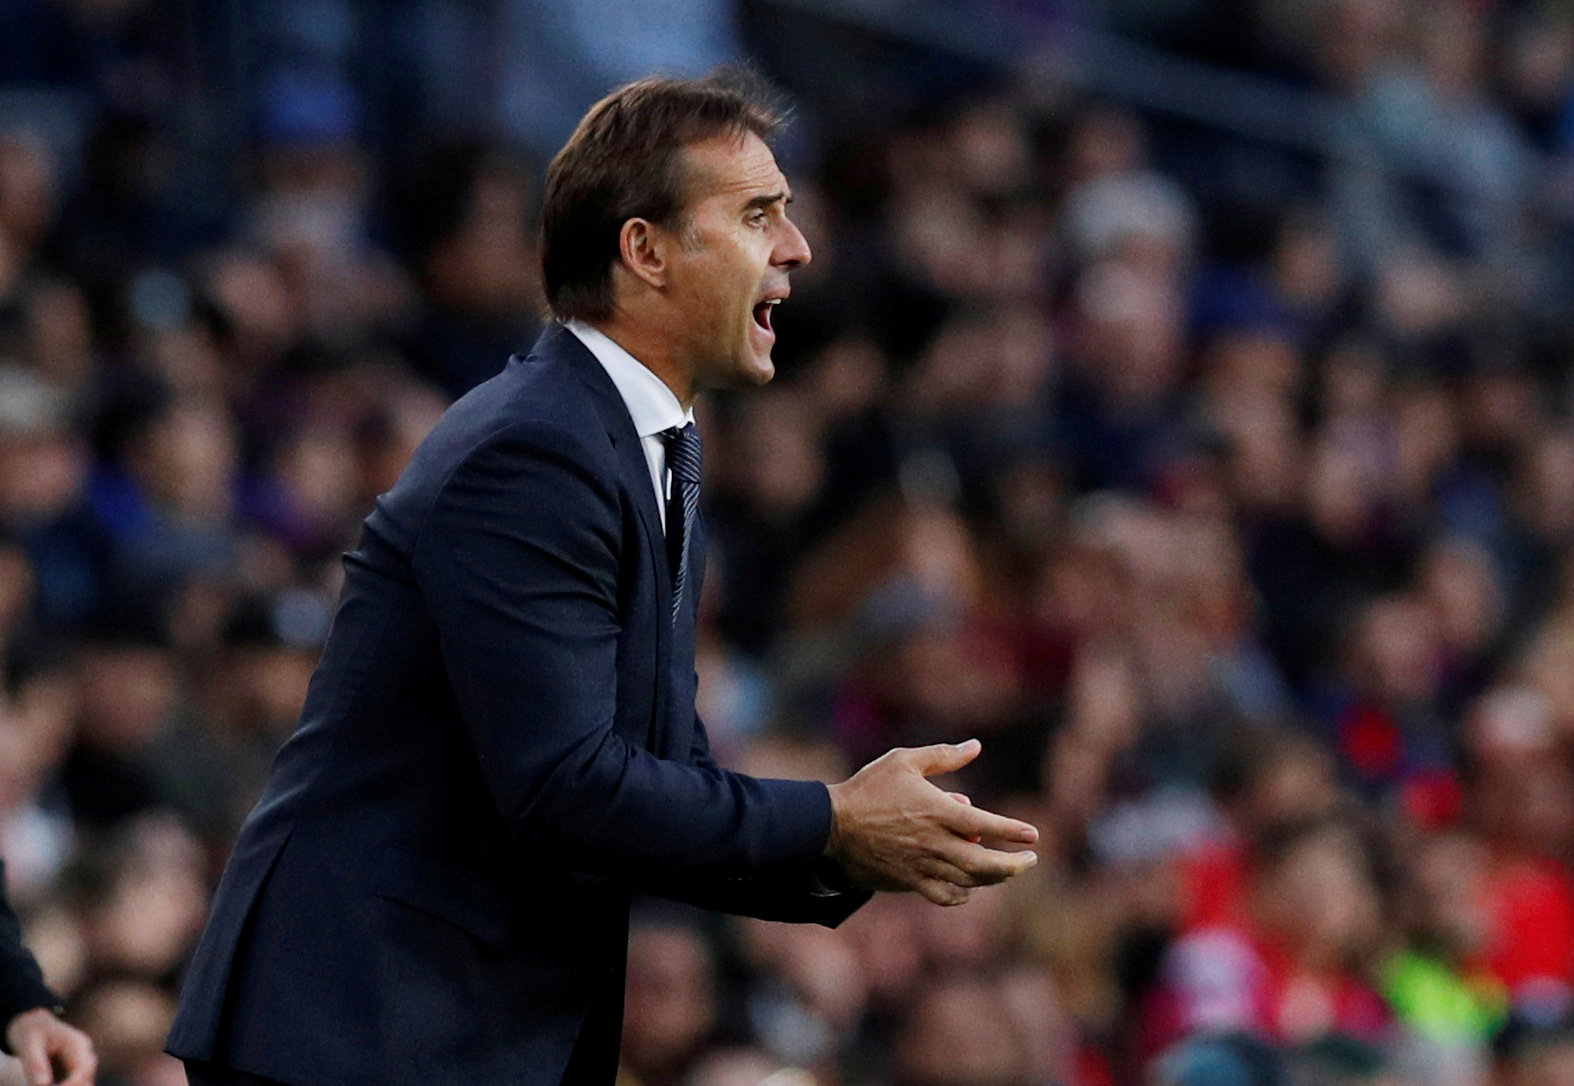 Football: Real to sack Lopetegui and appoint Conte - reports